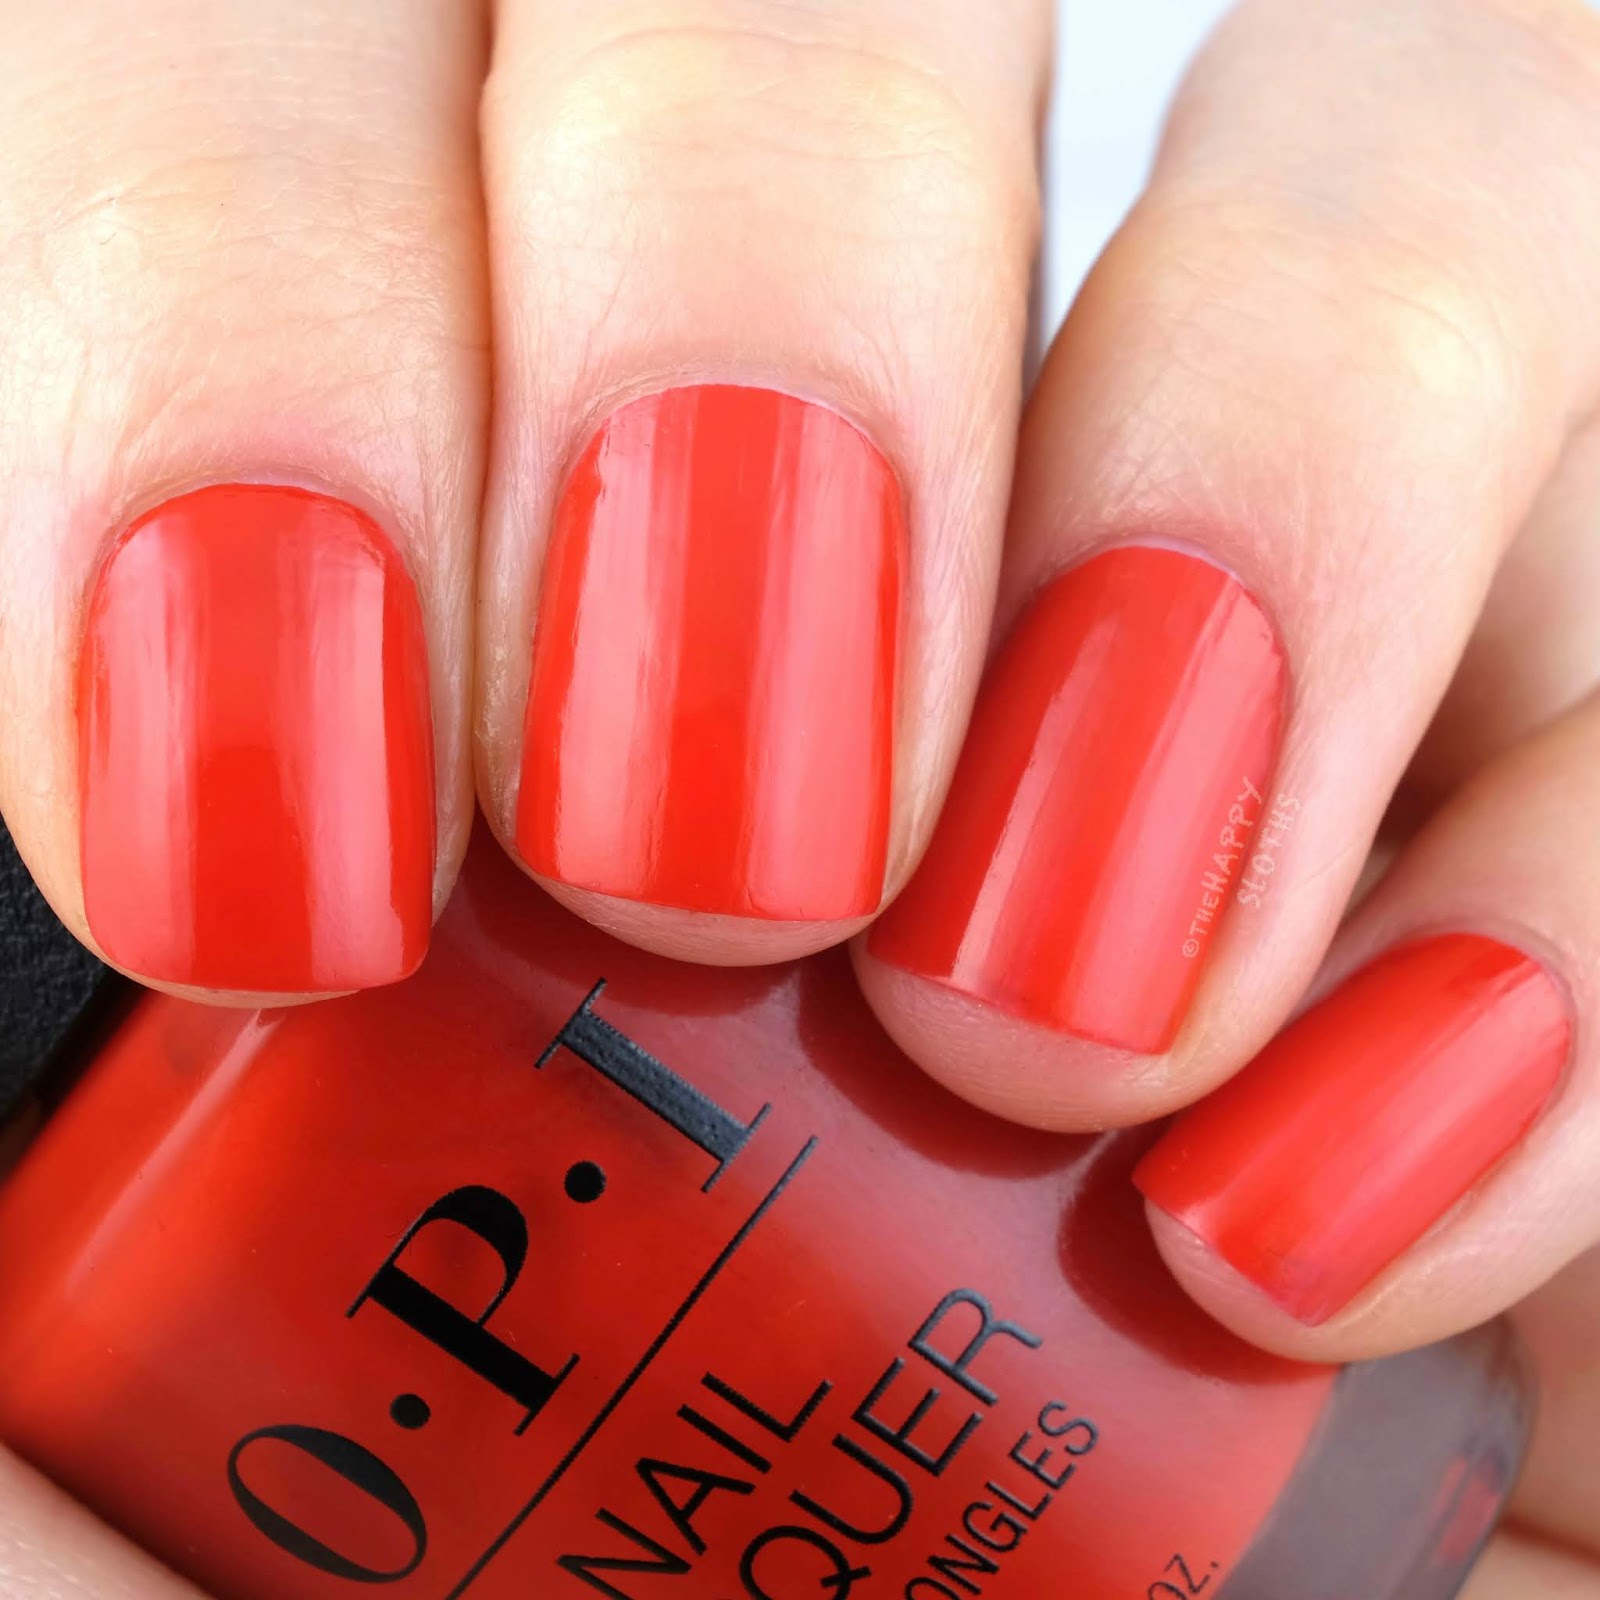 OPI Spring 2020 Mexico City | ¡Viva OPI!: Review and Swatches